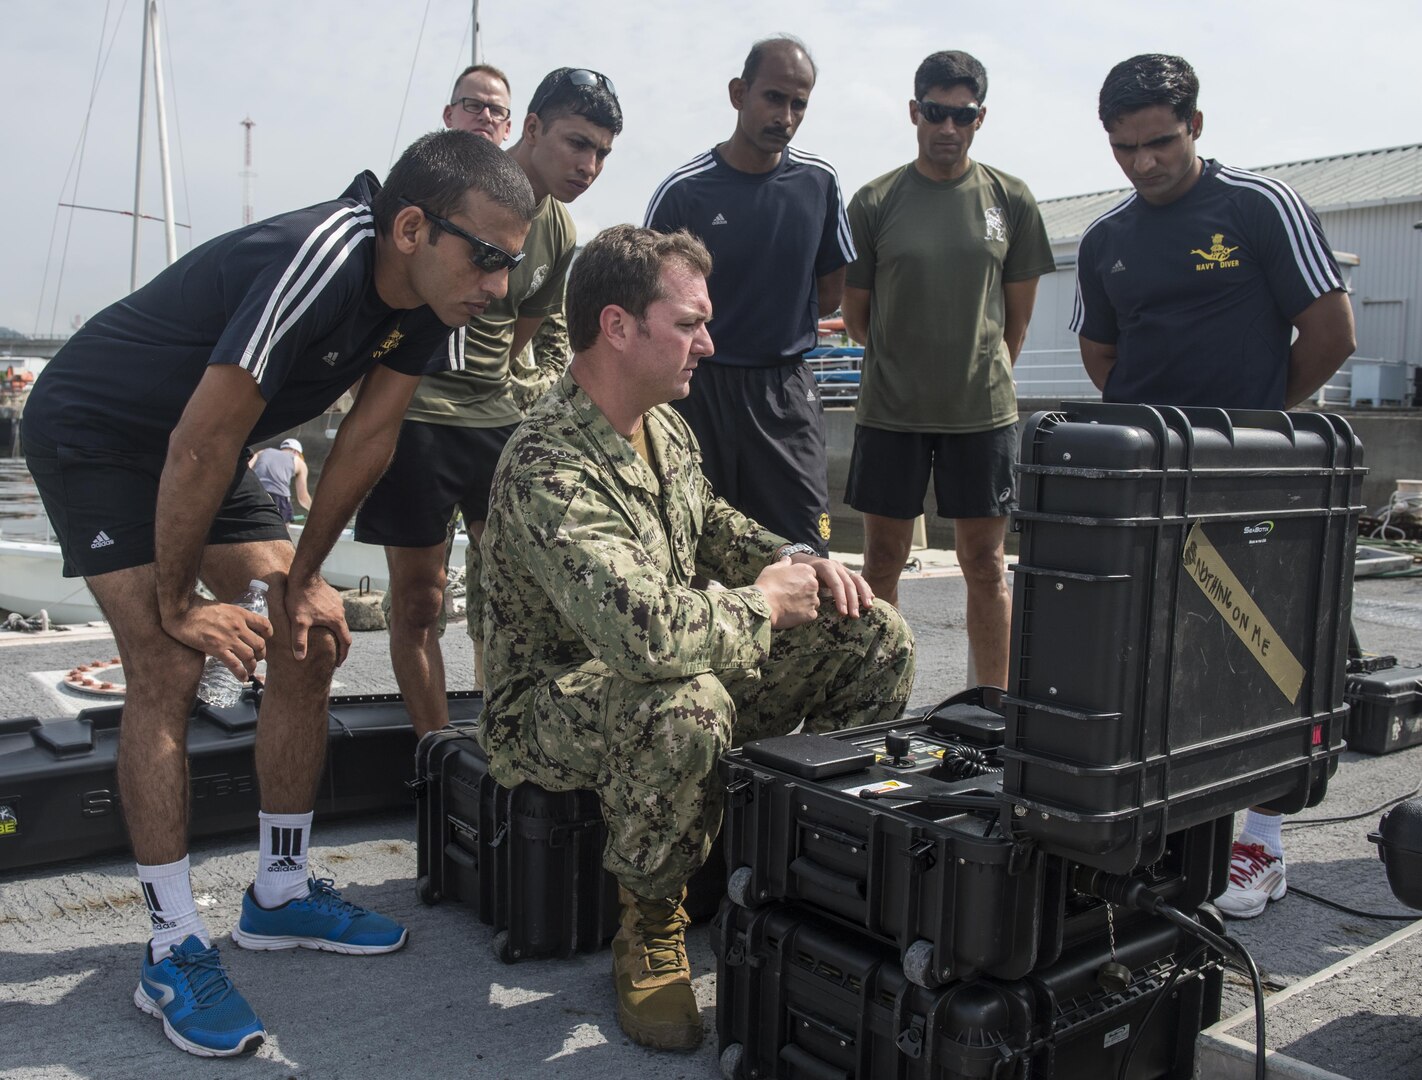 A U.S. Navy Explosive Ordnance Disposal technician assigned to EOD Mobile Unit 11 explains an unmanned underwater vehicle system to Indian EOD technicians during exercise Malabar 2016. A trilateral maritime exercise, Malabar is designed to enhance dynamic cooperation between the Indian Navy, Japan Maritime Self-Defense Force (JMSDF) and U.S. Navy forces in the Indo-Asia-Pacific. (U.S. Navy combat camera photo by Mass Communication Specialist 1st Class Charles E. White/Released)